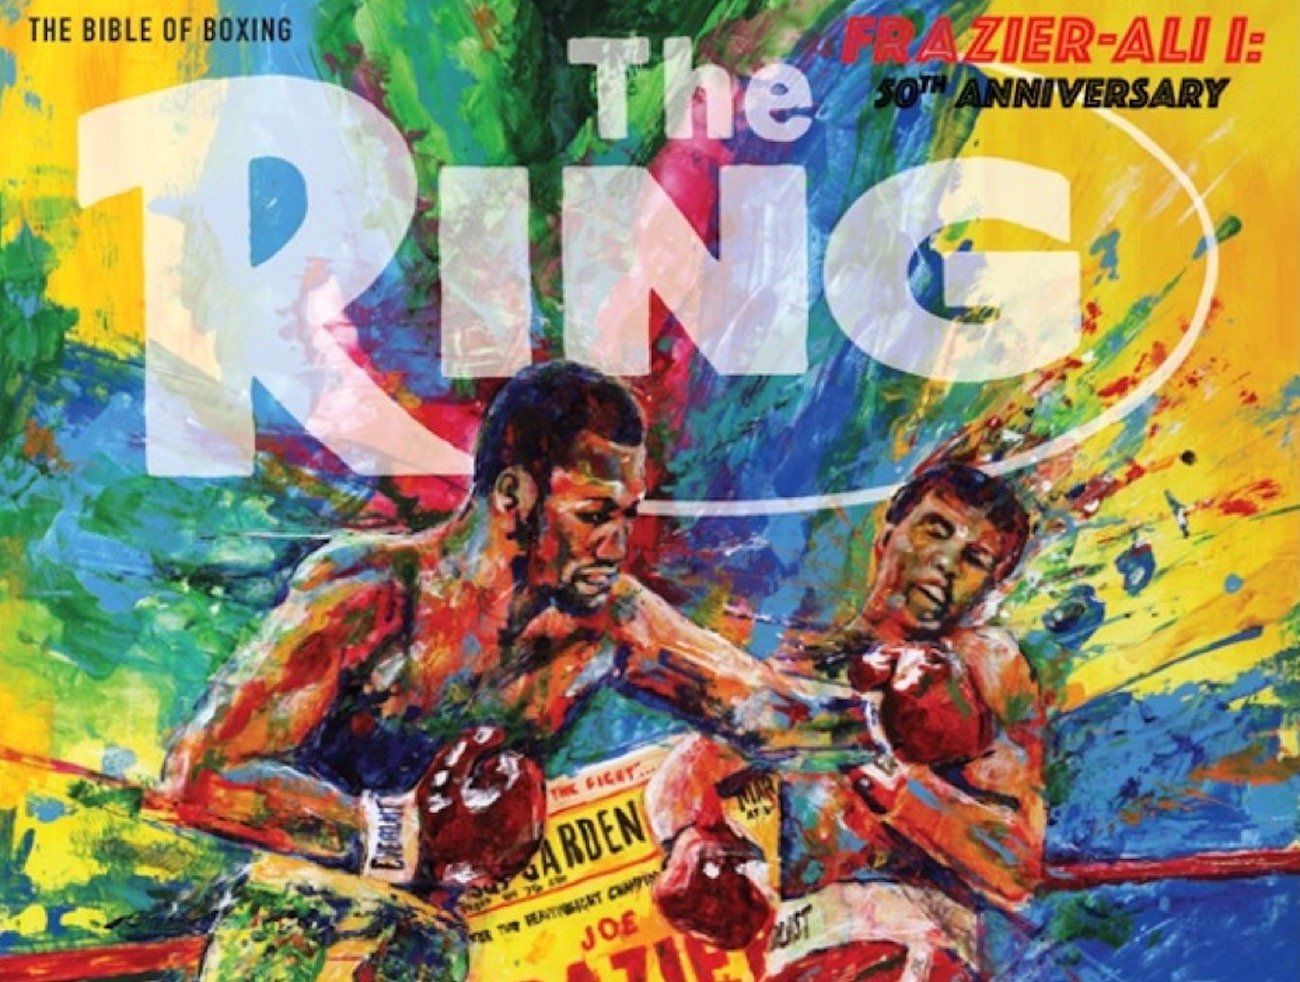 Iconic Joe Frazier - Muhammad Ali 50th Anniversary Special From Ring Magazine